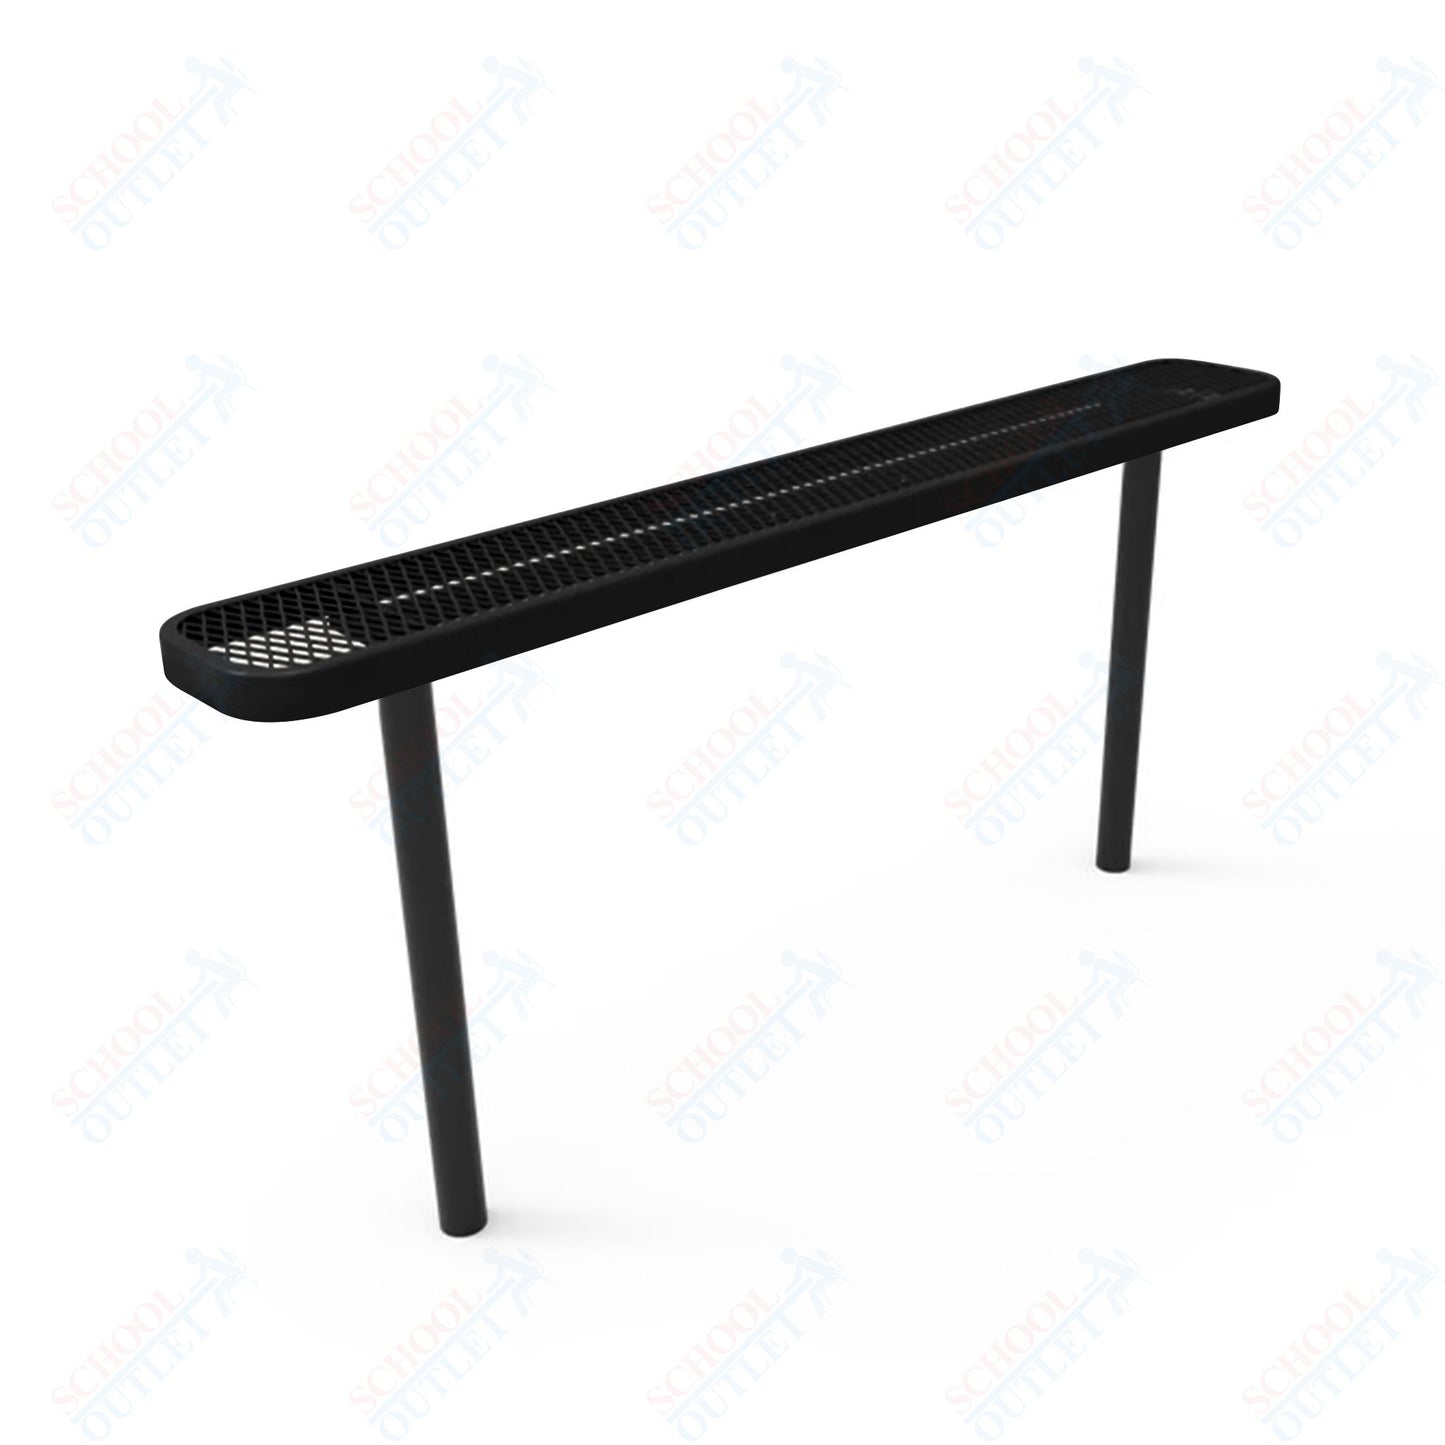 MyTcoat - Standard Outdoor Bench with Back - Inground Mount 6' L (MYT-BRT06-22)